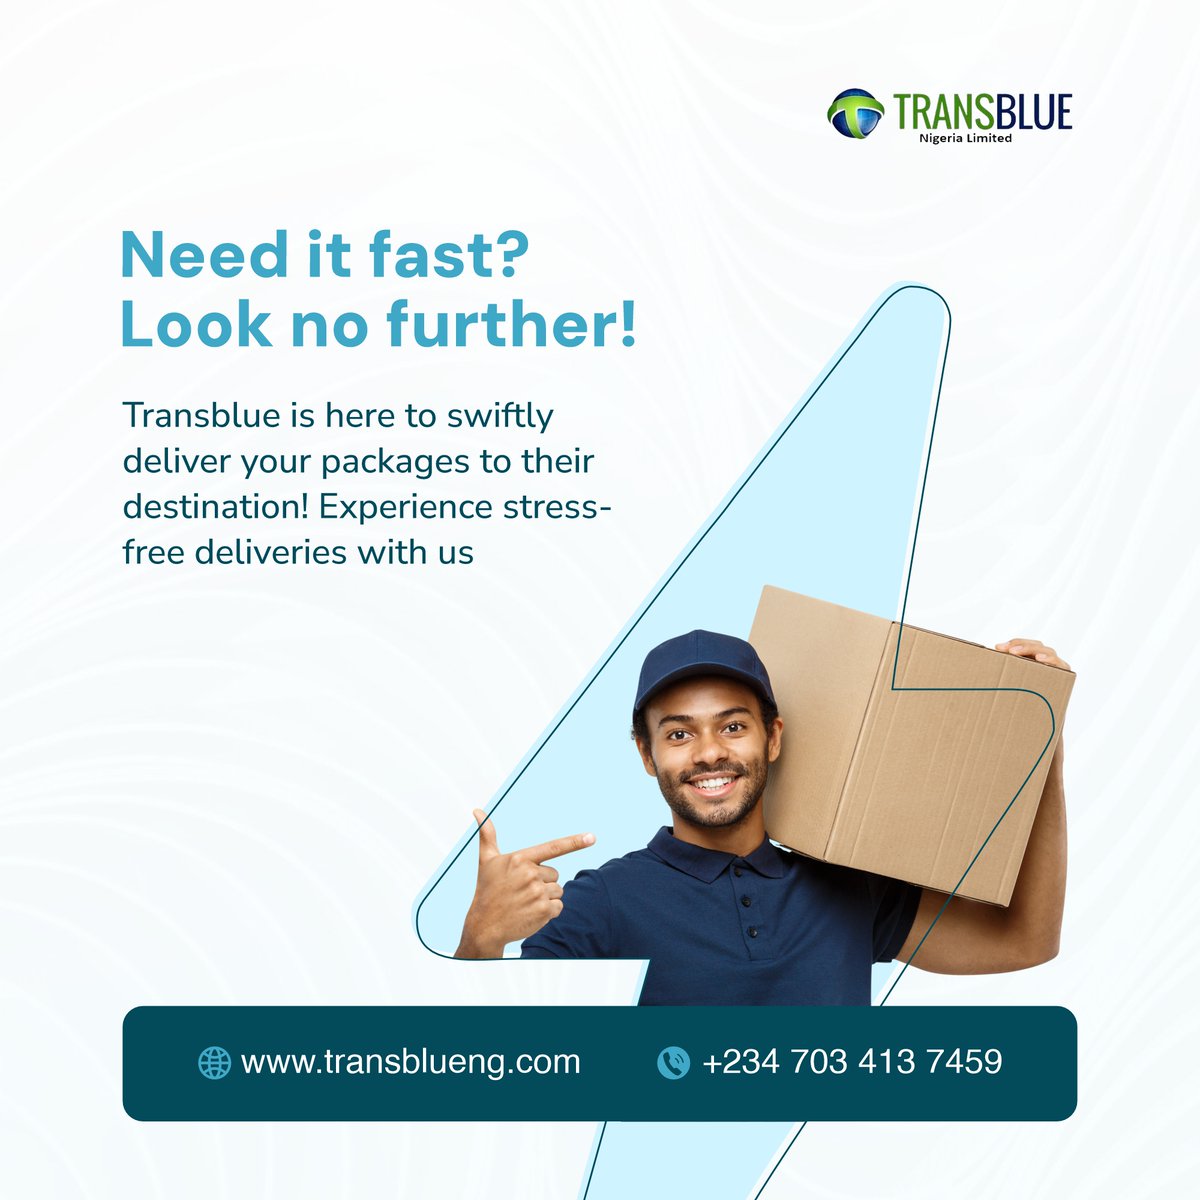 Experience the speed you need with Transblue! #FastDelivery #TransblueLogistics